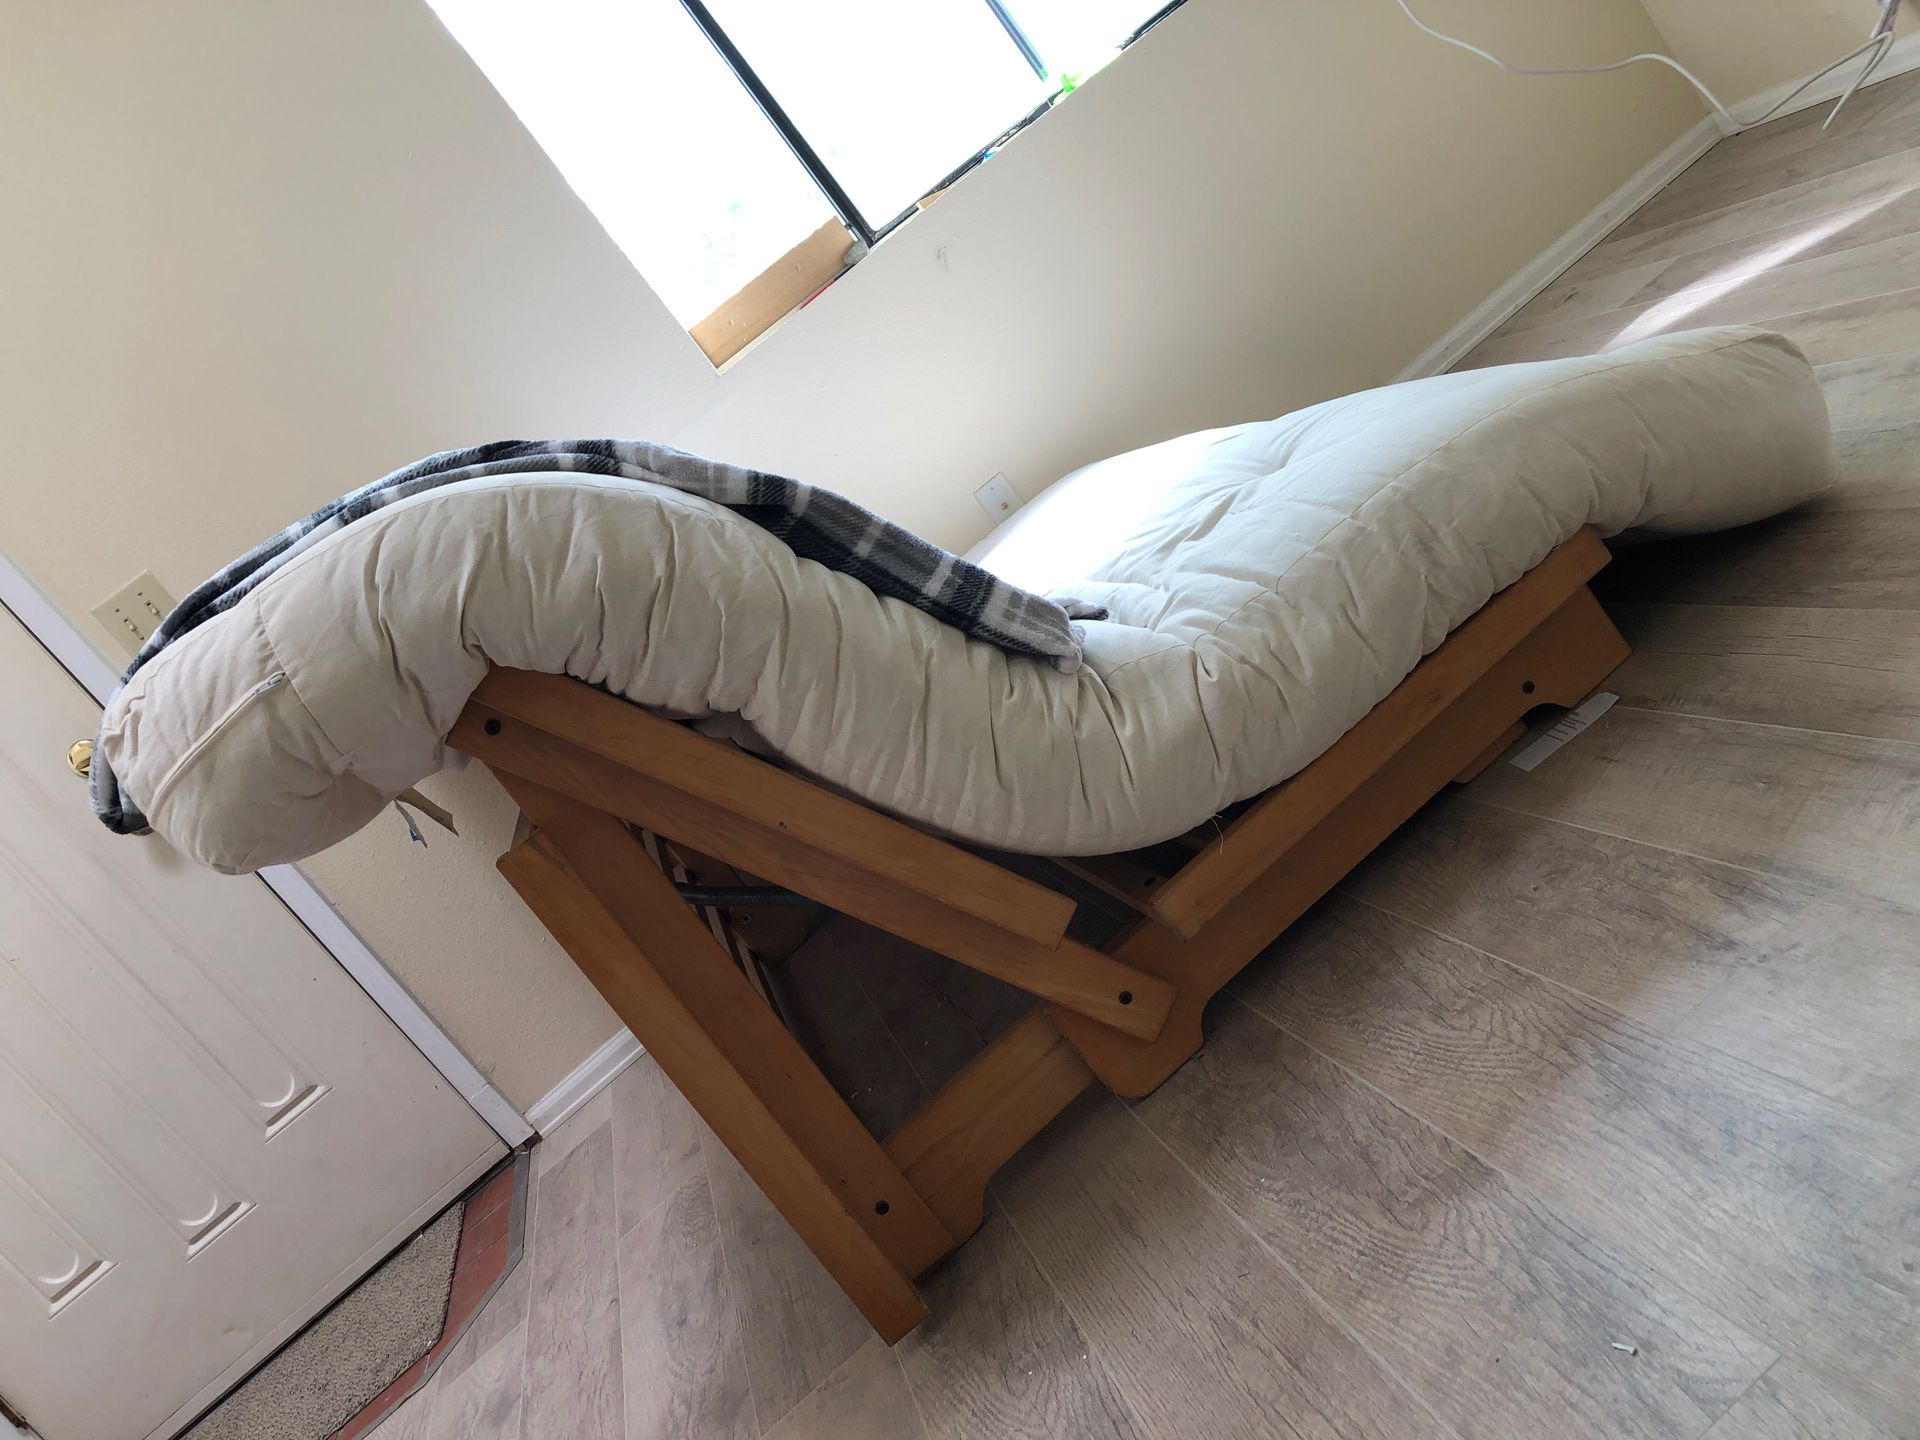 Futon used wood in good shape mattress for futon just needs a cover